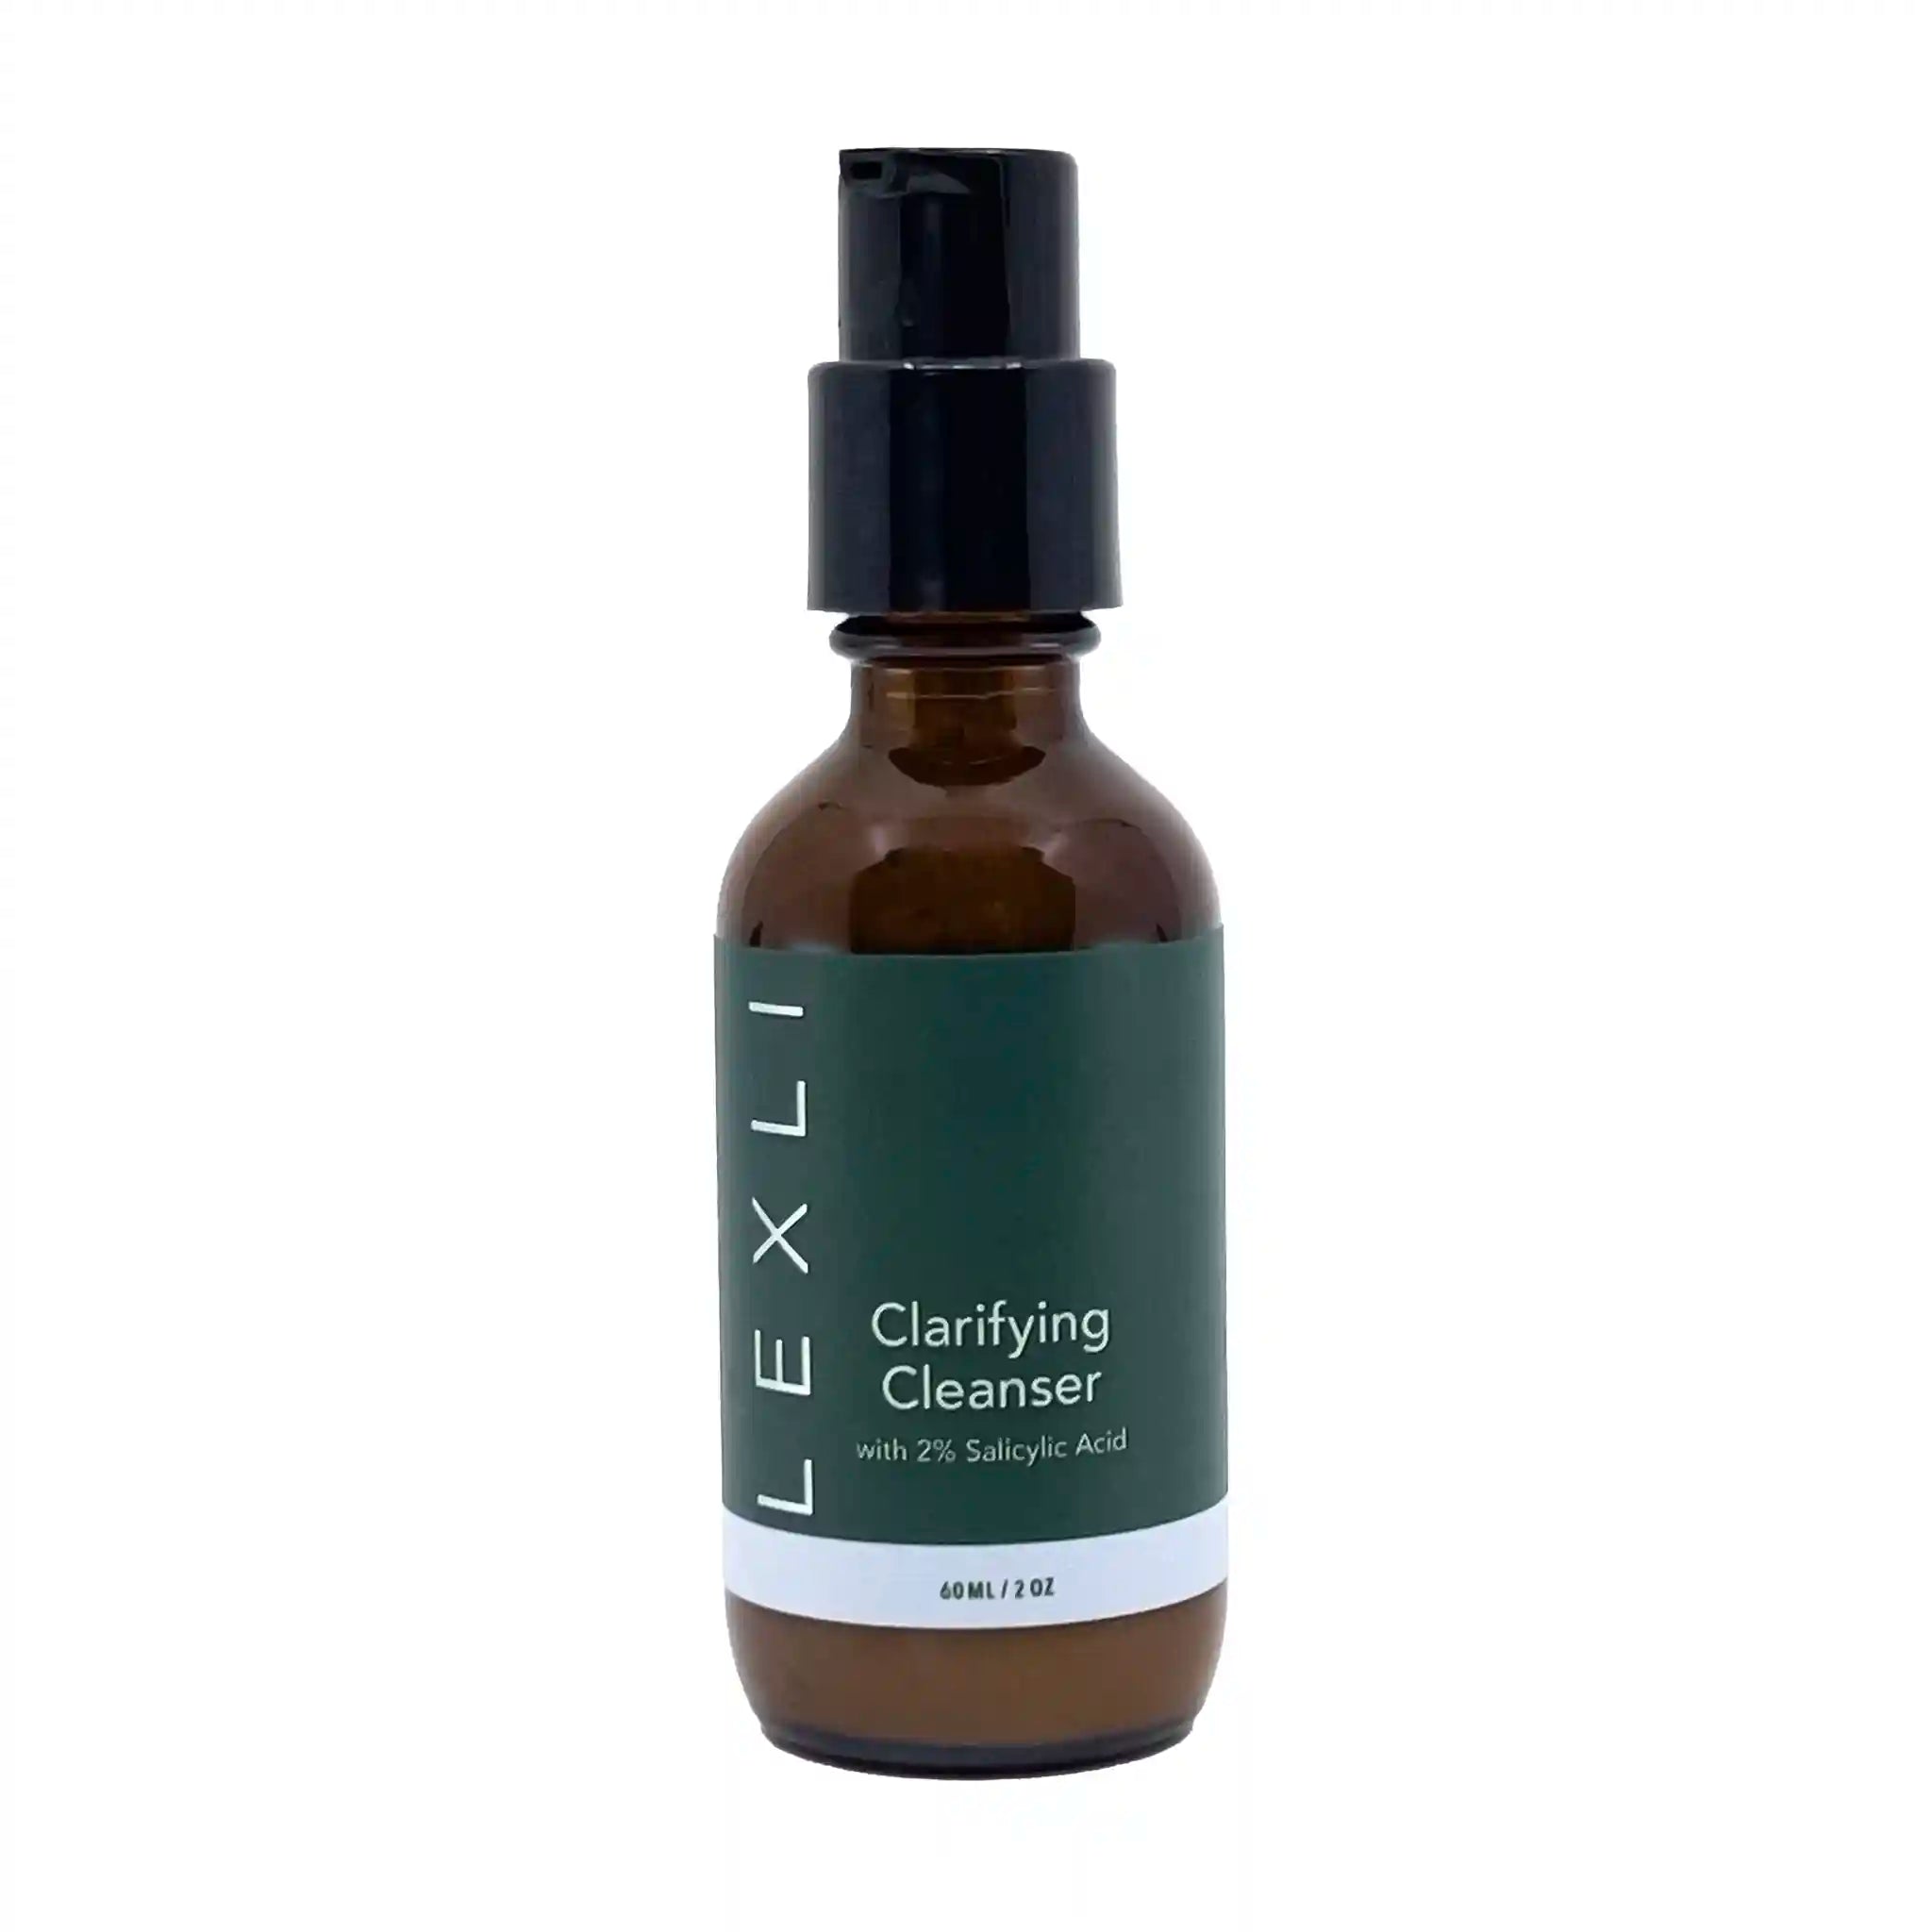 2 oz bottle with green label, Clarifying Cleanser